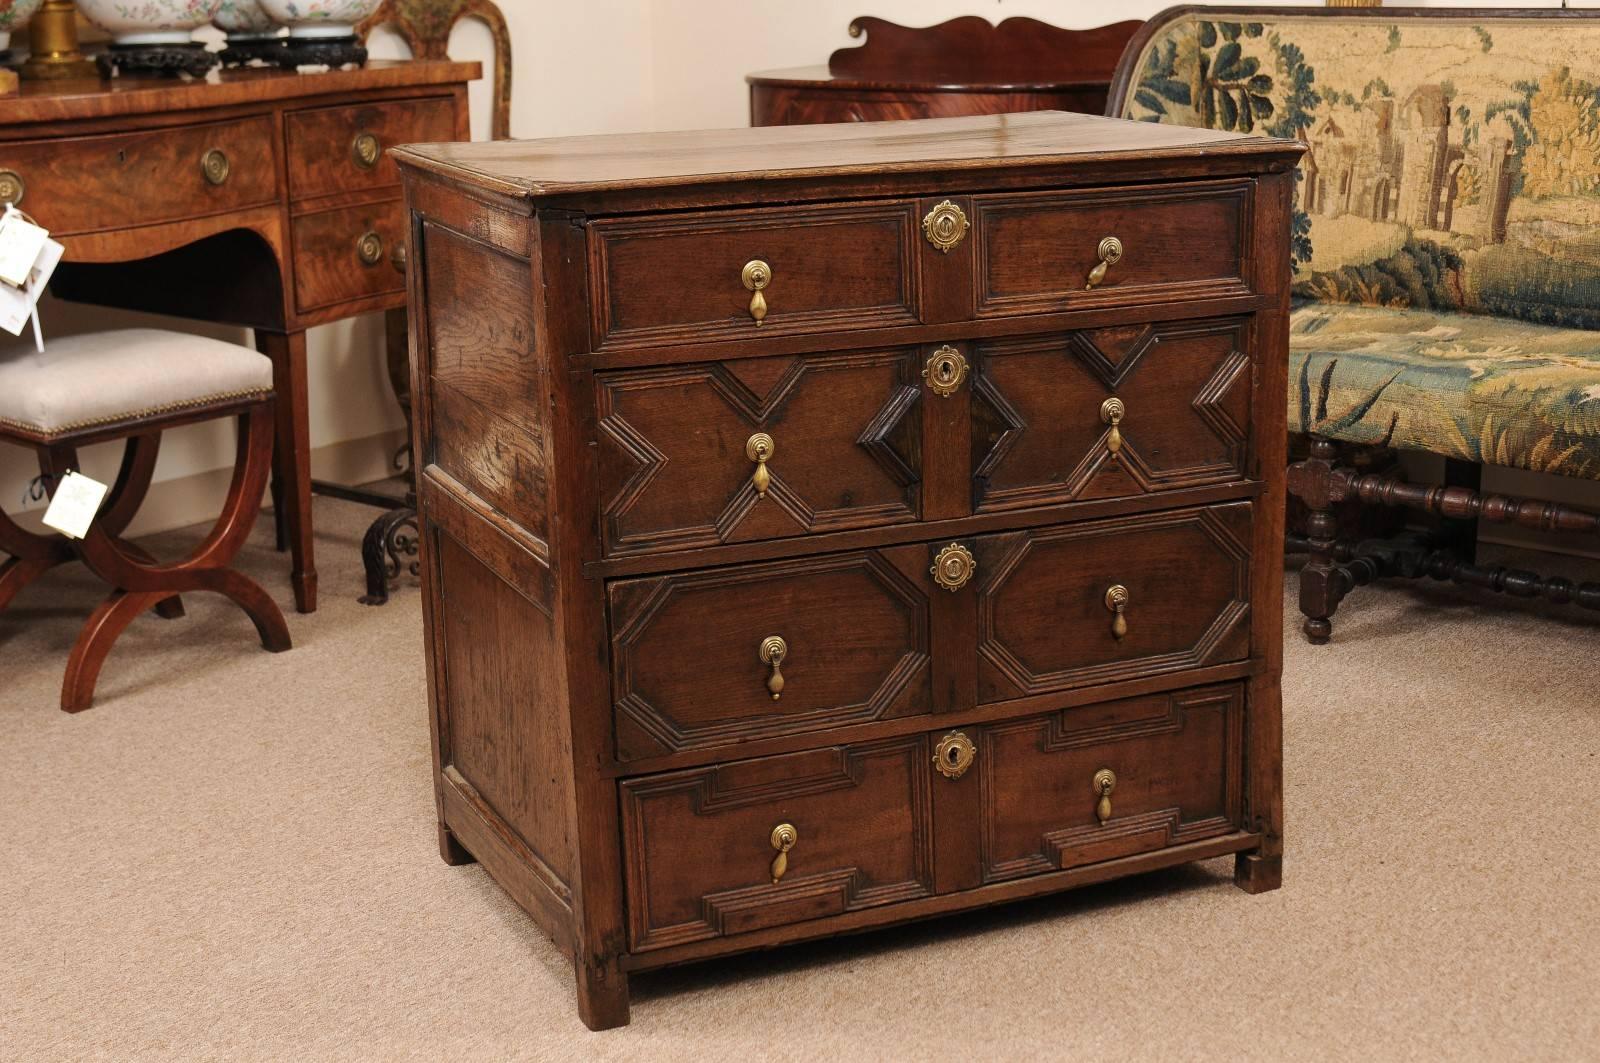 Jacobean style chest in oak with four intricately carved drawers and brass pulls, England, 18th century.